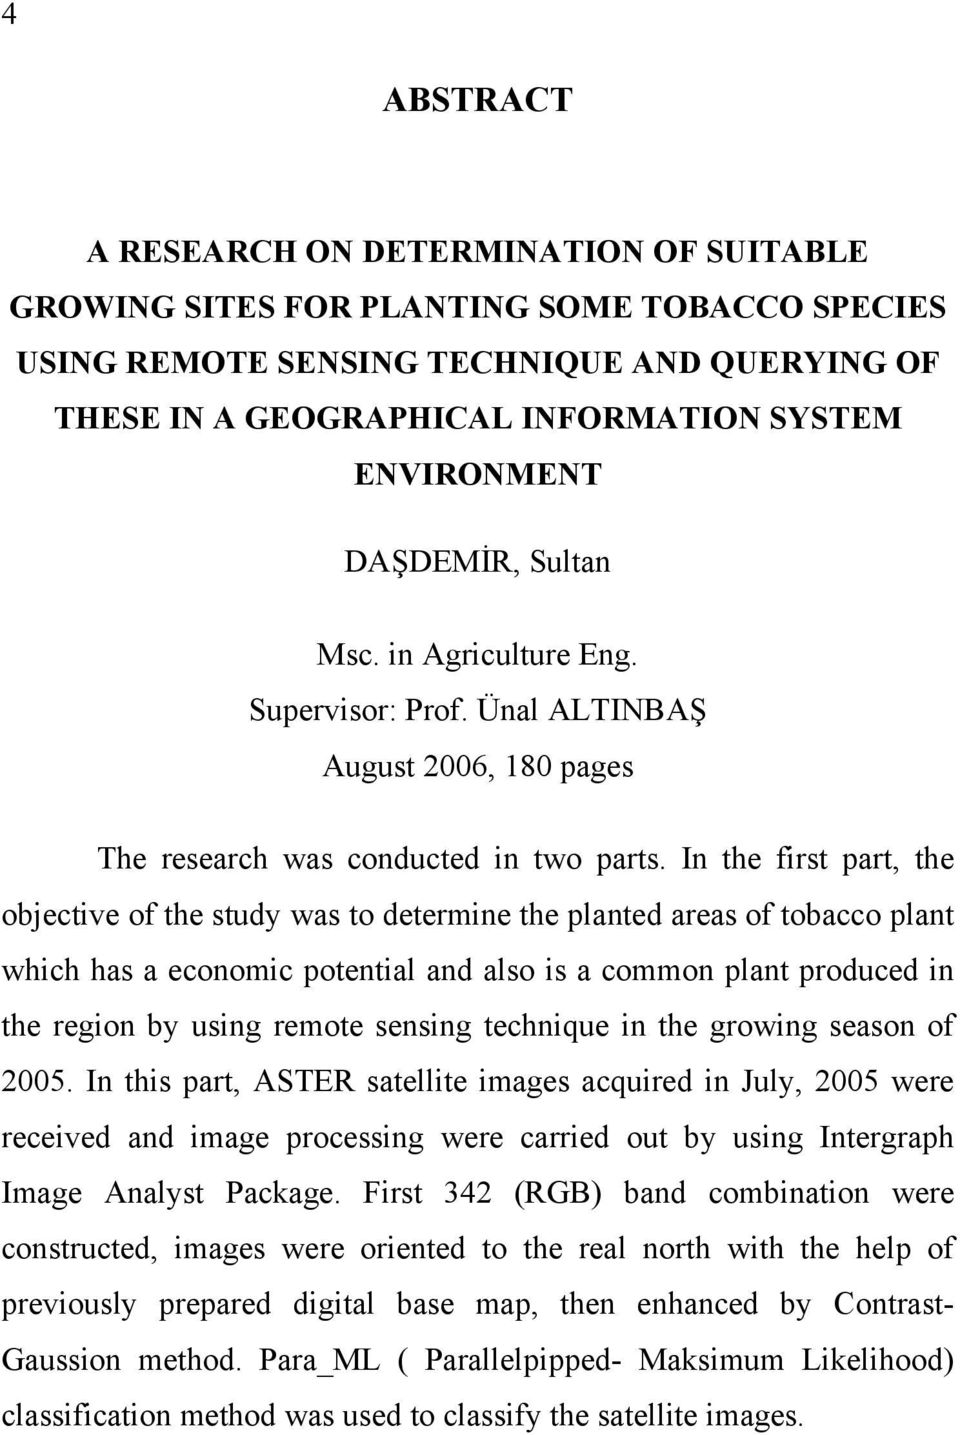 In the first part, the objective of the study was to determine the planted areas of tobacco plant which has a economic potential and also is a common plant produced in the region by using remote